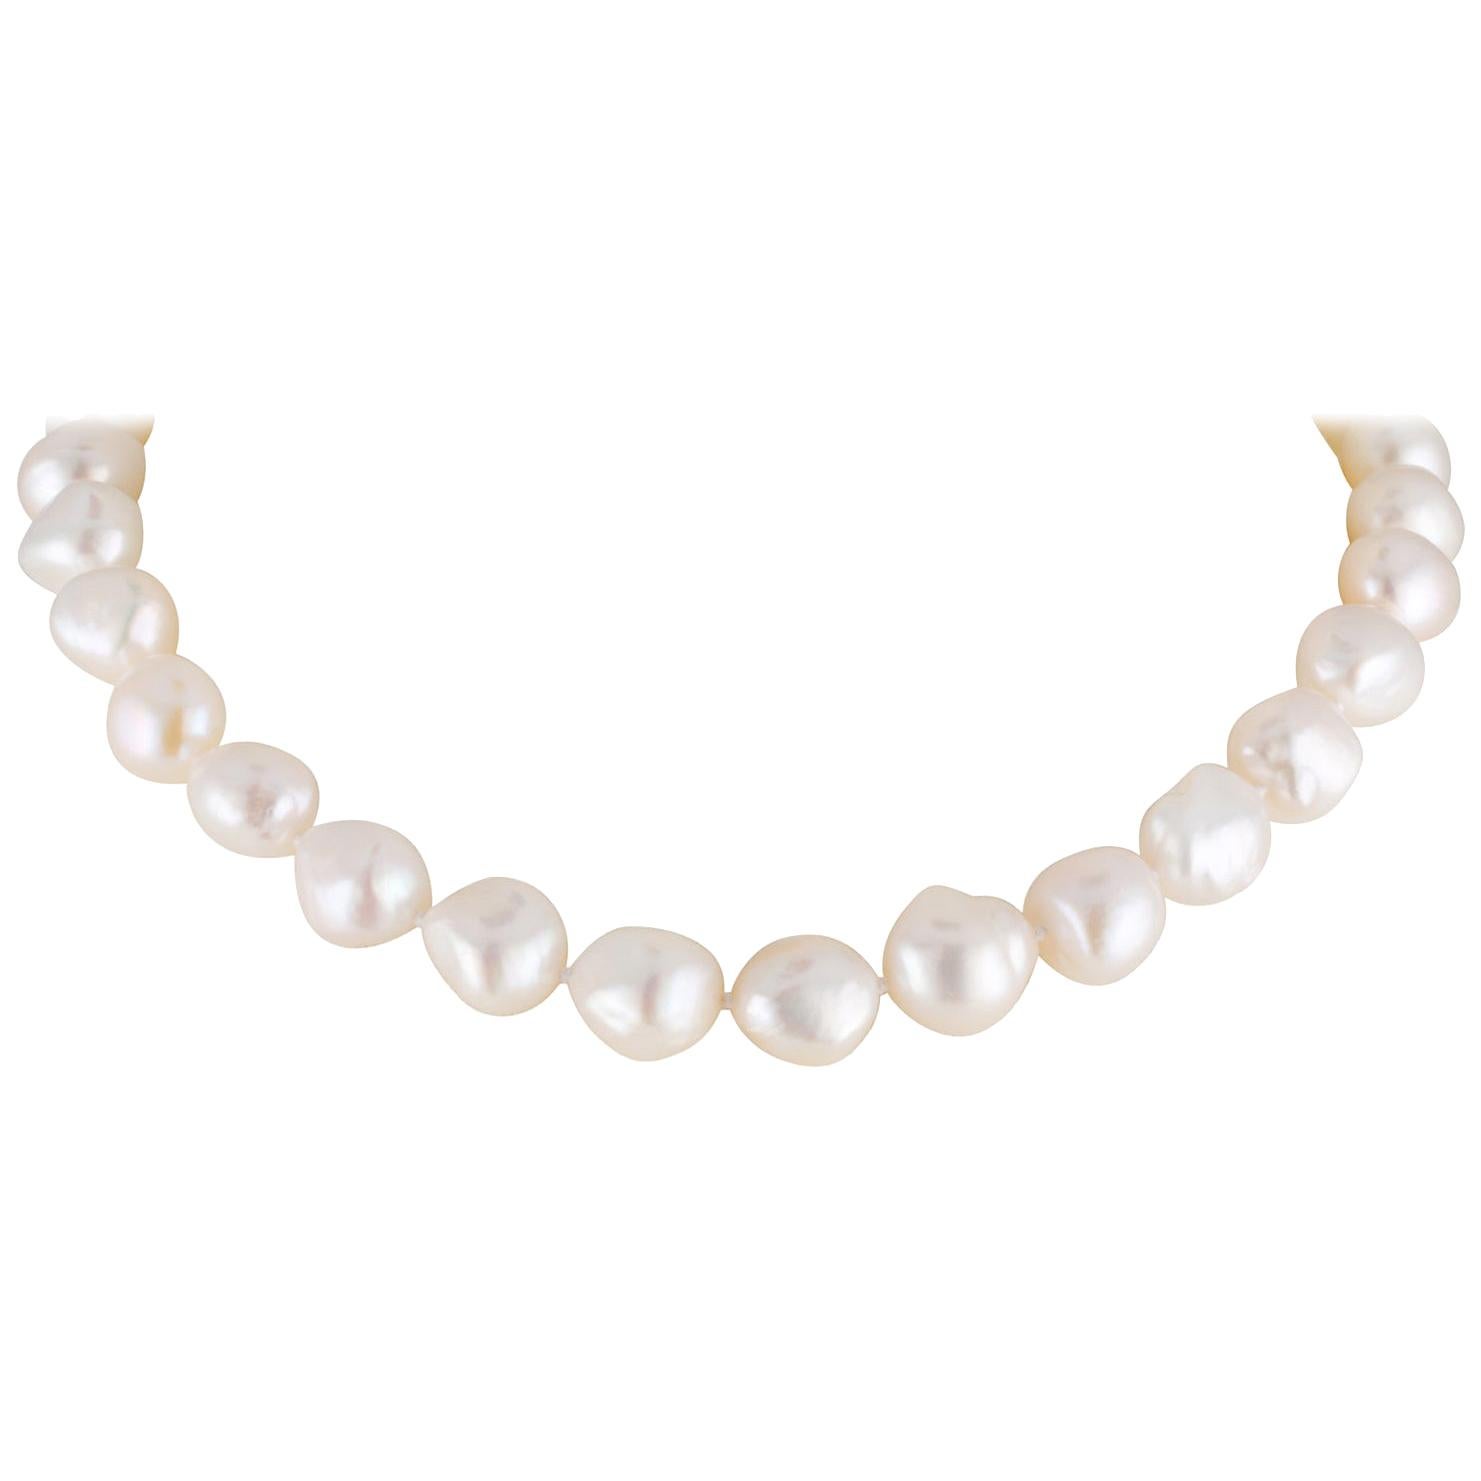 YOUR SIGNATURE ACCESSORY – Make a modern statement with this outsized strand of lustrous, genuine freshwater cultured pearls in a fashionably bold 10-12mm diameter. An easy-to-manage push-button clasp in a silver color ensures a secure fit. The